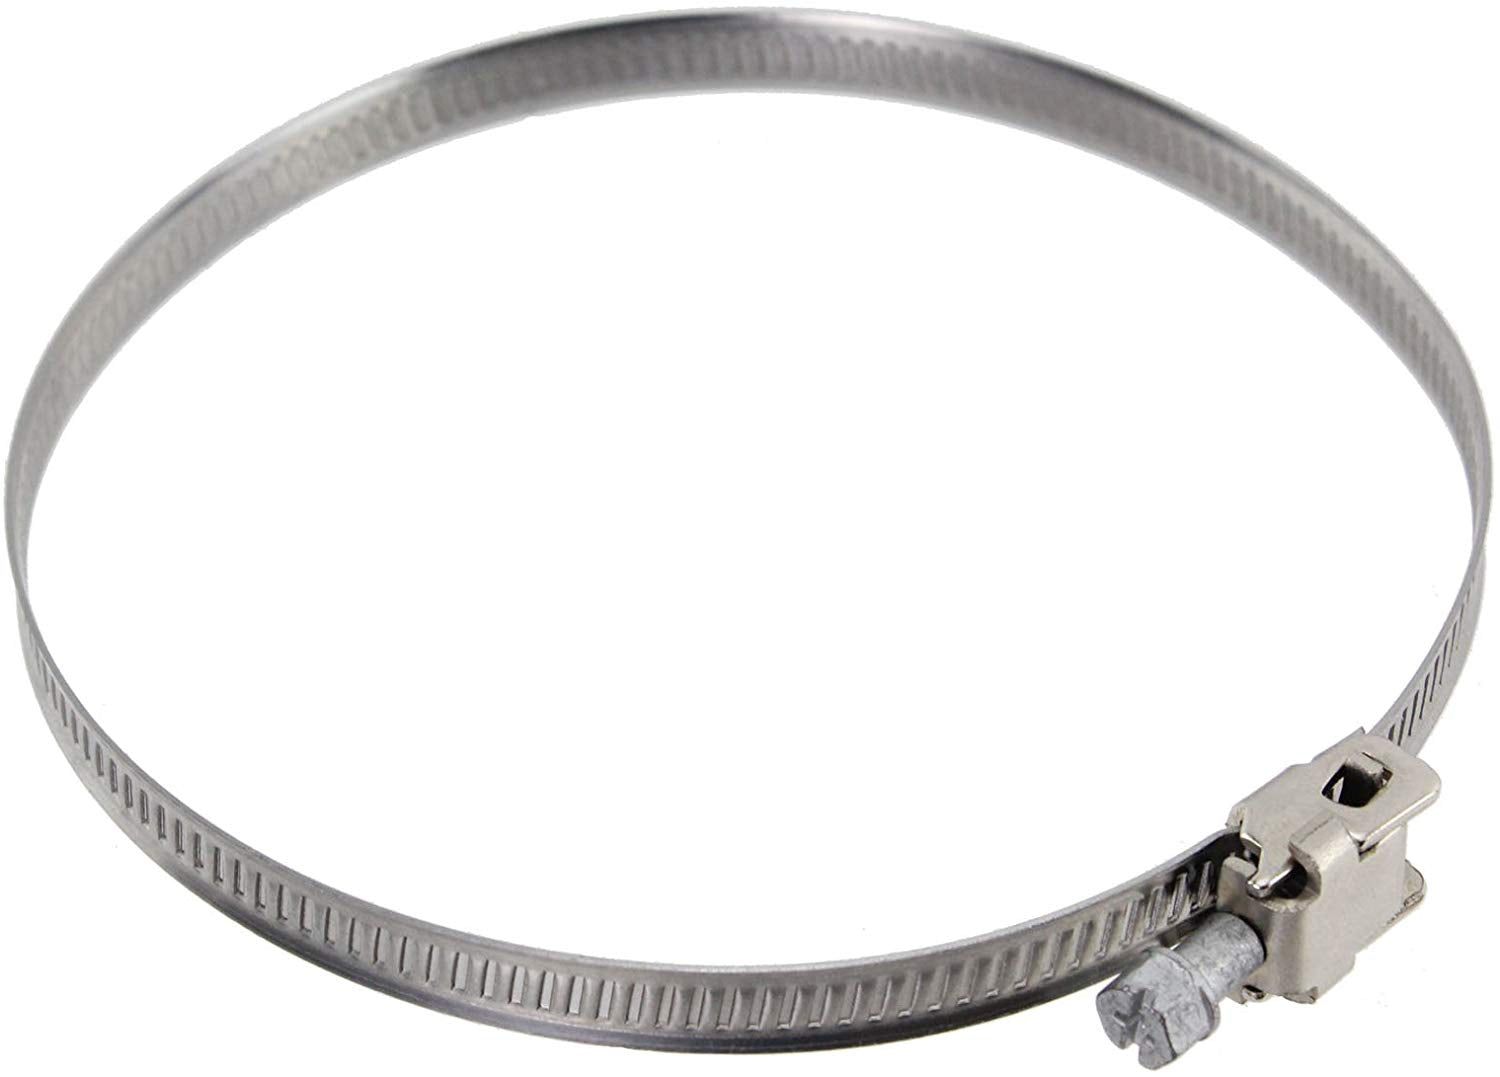 Condenser Box & Extra Long Hose Kit With Connection Ring for White Knight Tumble Dryer (4" / 100mm Diameter / 6M Hose)